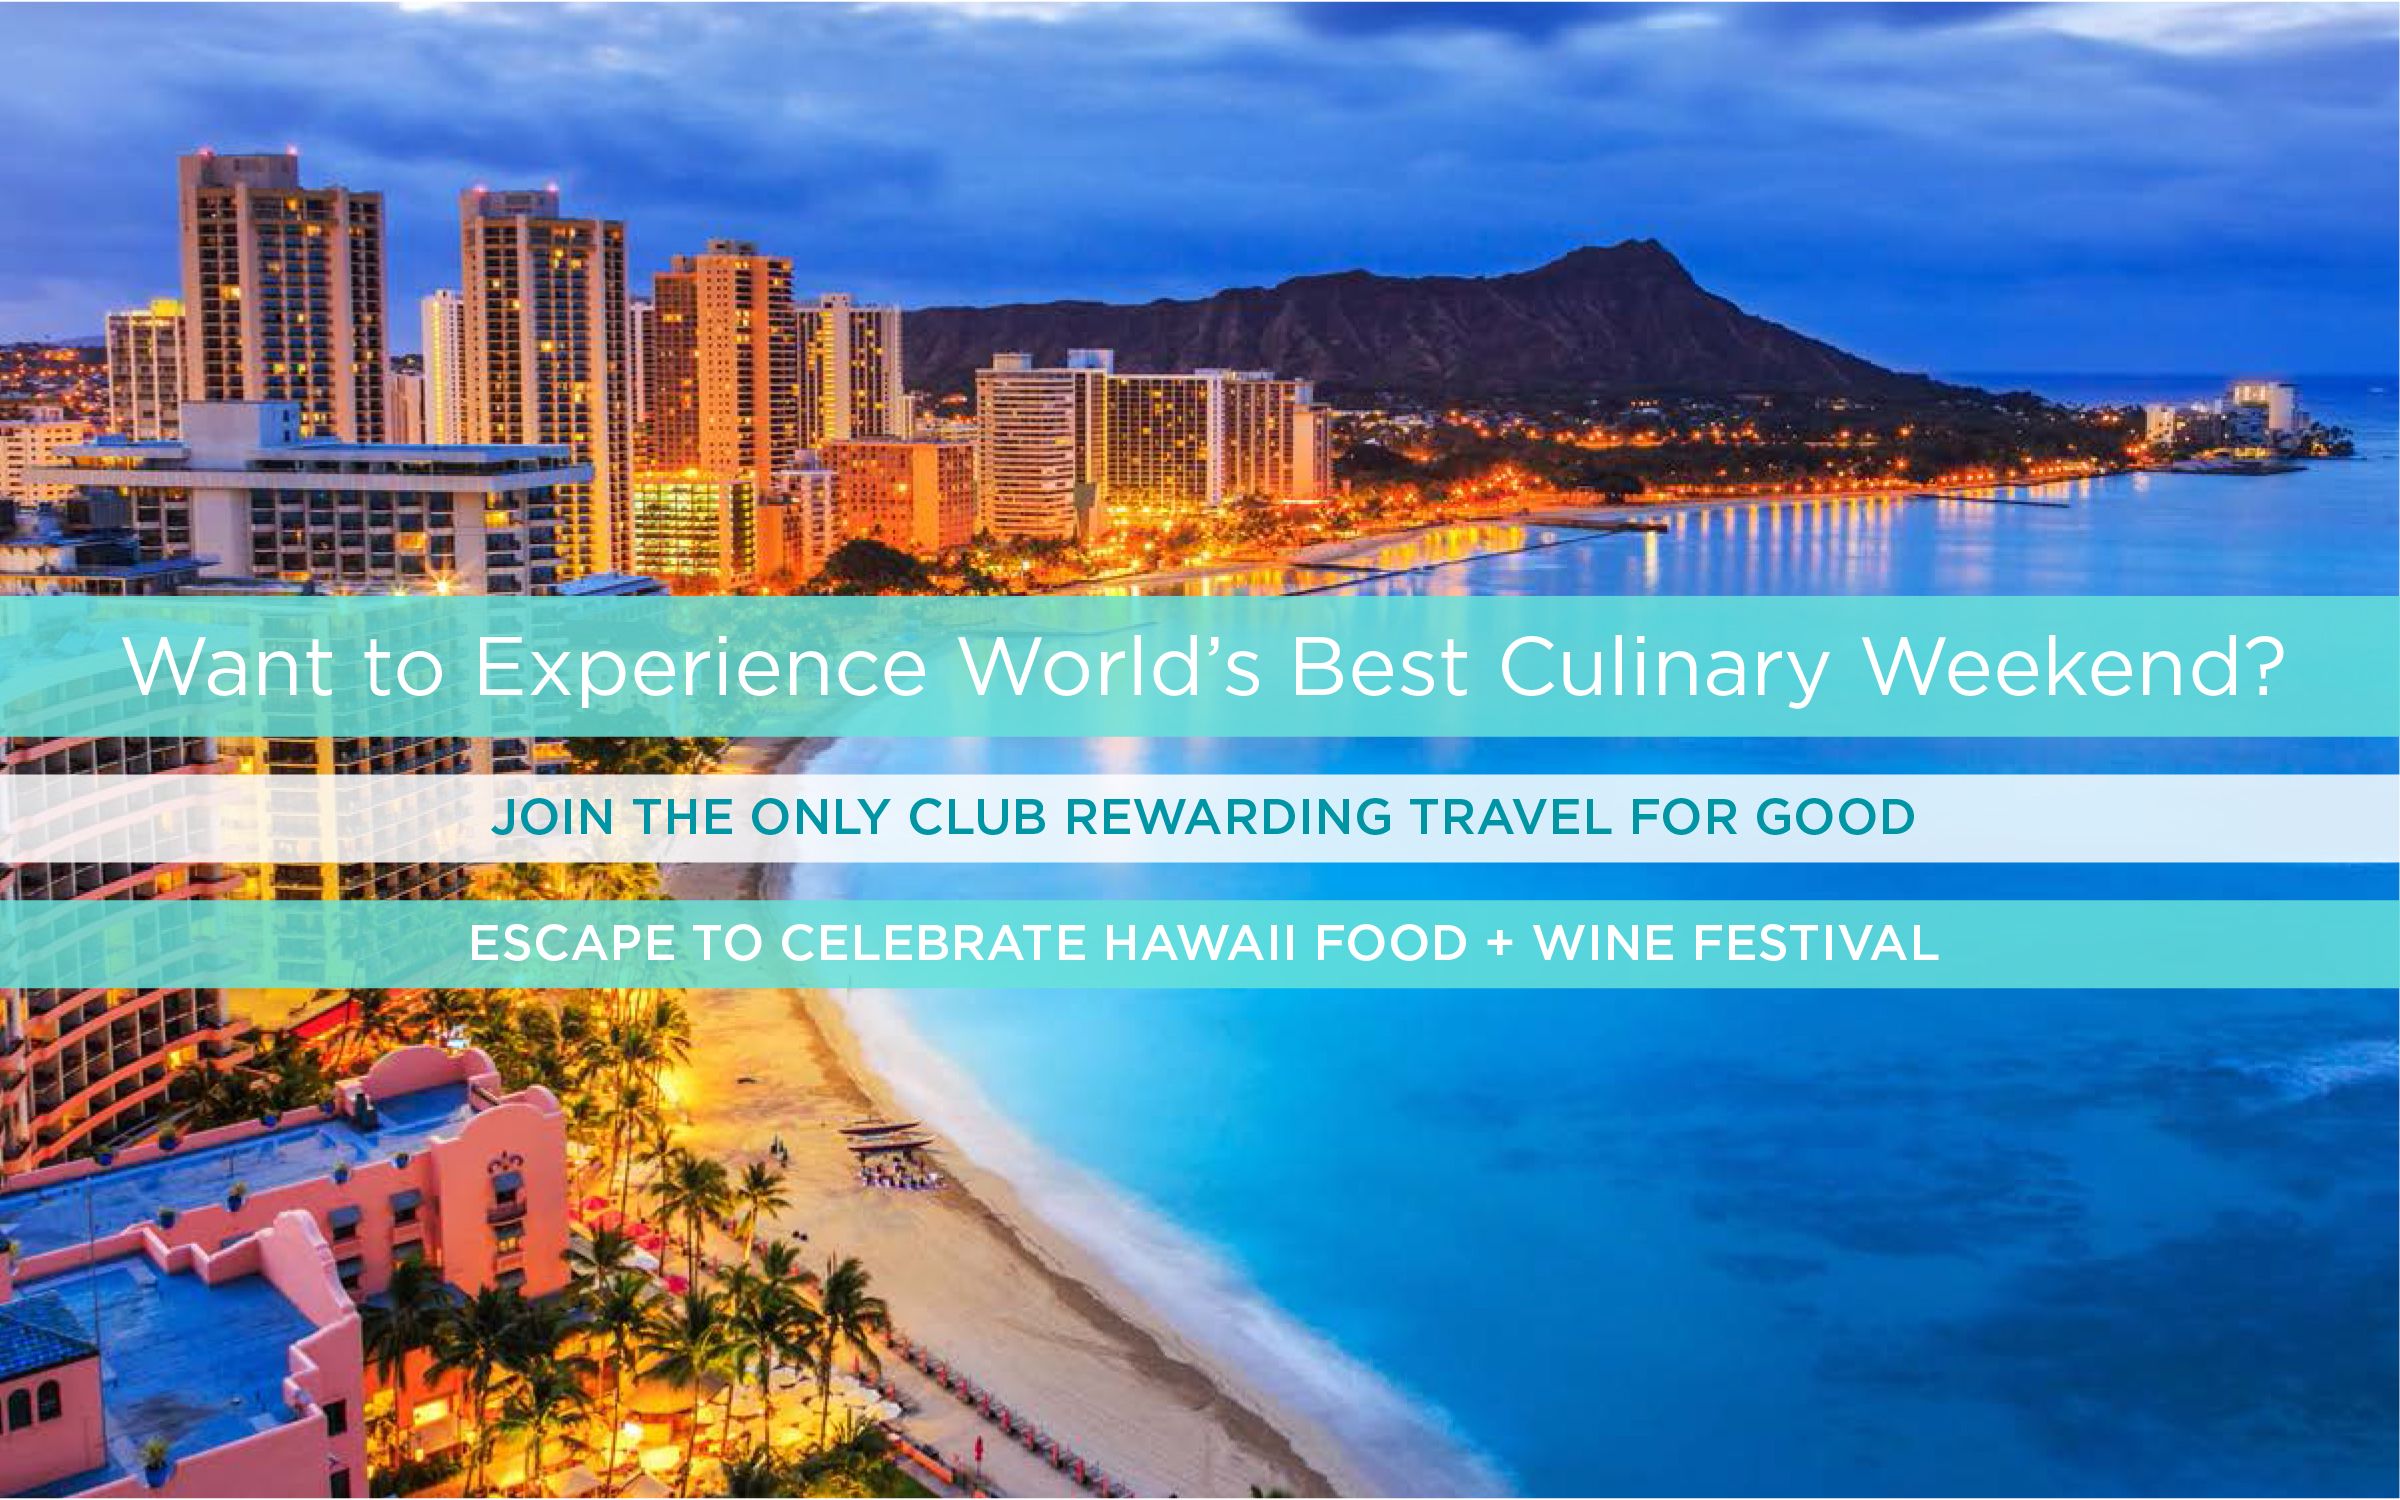 Rewarding Party for Good at Hawaii Food & Wine Festival